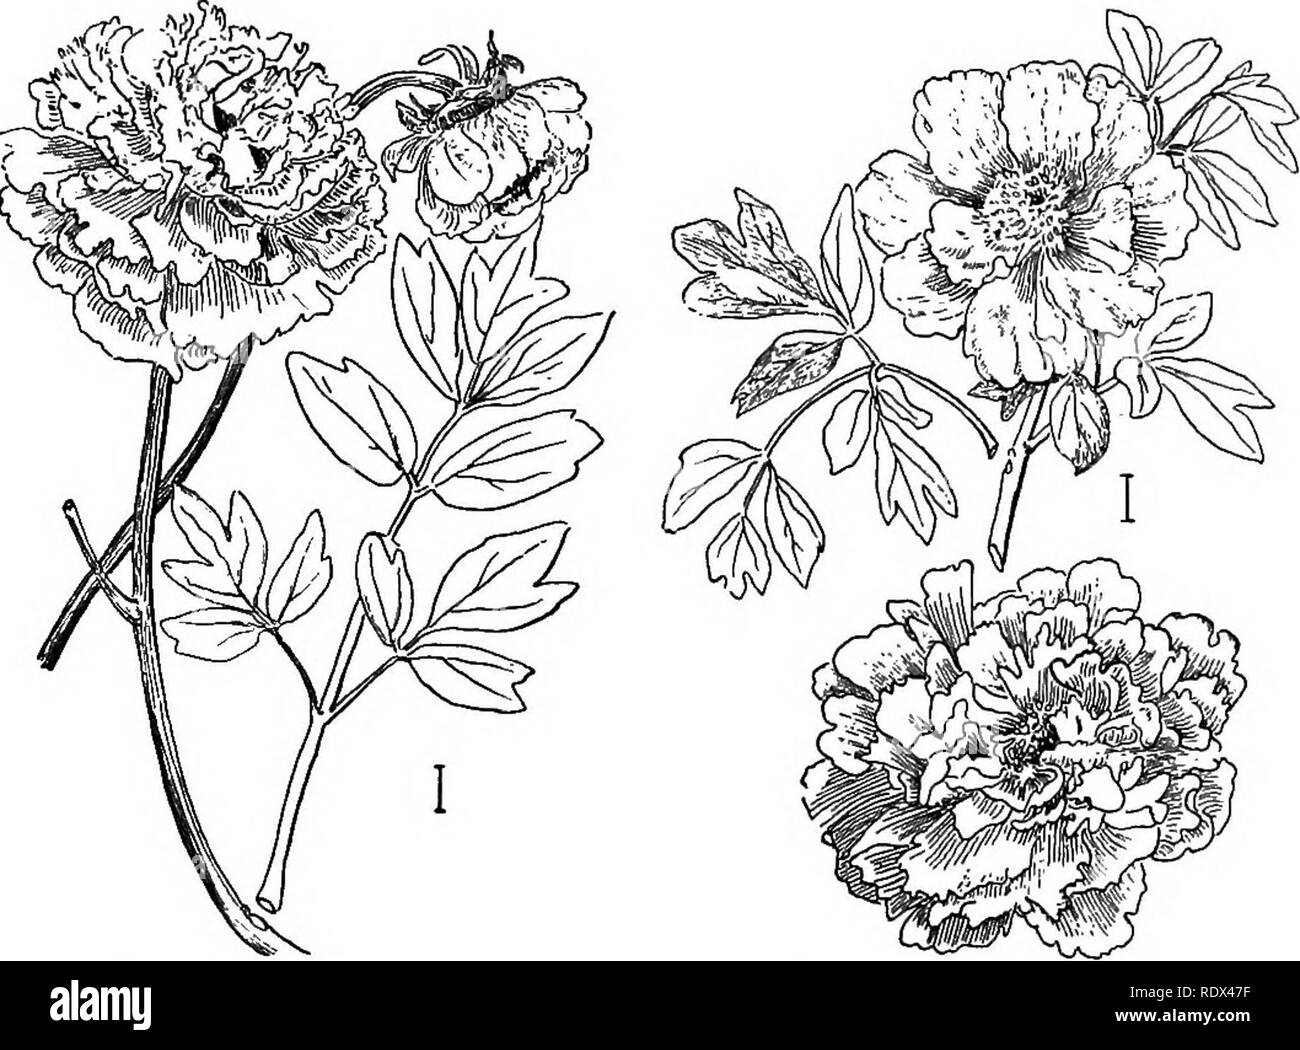 . Ornamental shrubs of the United States (hardy, cultivated). Shrubs. PART III DESCRIPTIONS OF THE SHRUBS Numbers in parenthesis in the keys and descriptions which follow refer to the figures. Bracketed information refers to methods of propagation. Paebnia. The Peonies form one of the most popular groups of plants. They are almost entirely large-flowered herbaceous perennials, though one species is shrubby and, therefore, to be included in our book. This is called Tkee Peony Kgs. (1) and (2) —Pseonia Moutdn, — growing to the. Fig. 1. —Tree Peony. Fia. 2. —Tree Peony. height of 3 to 8 feet with Stock Photo